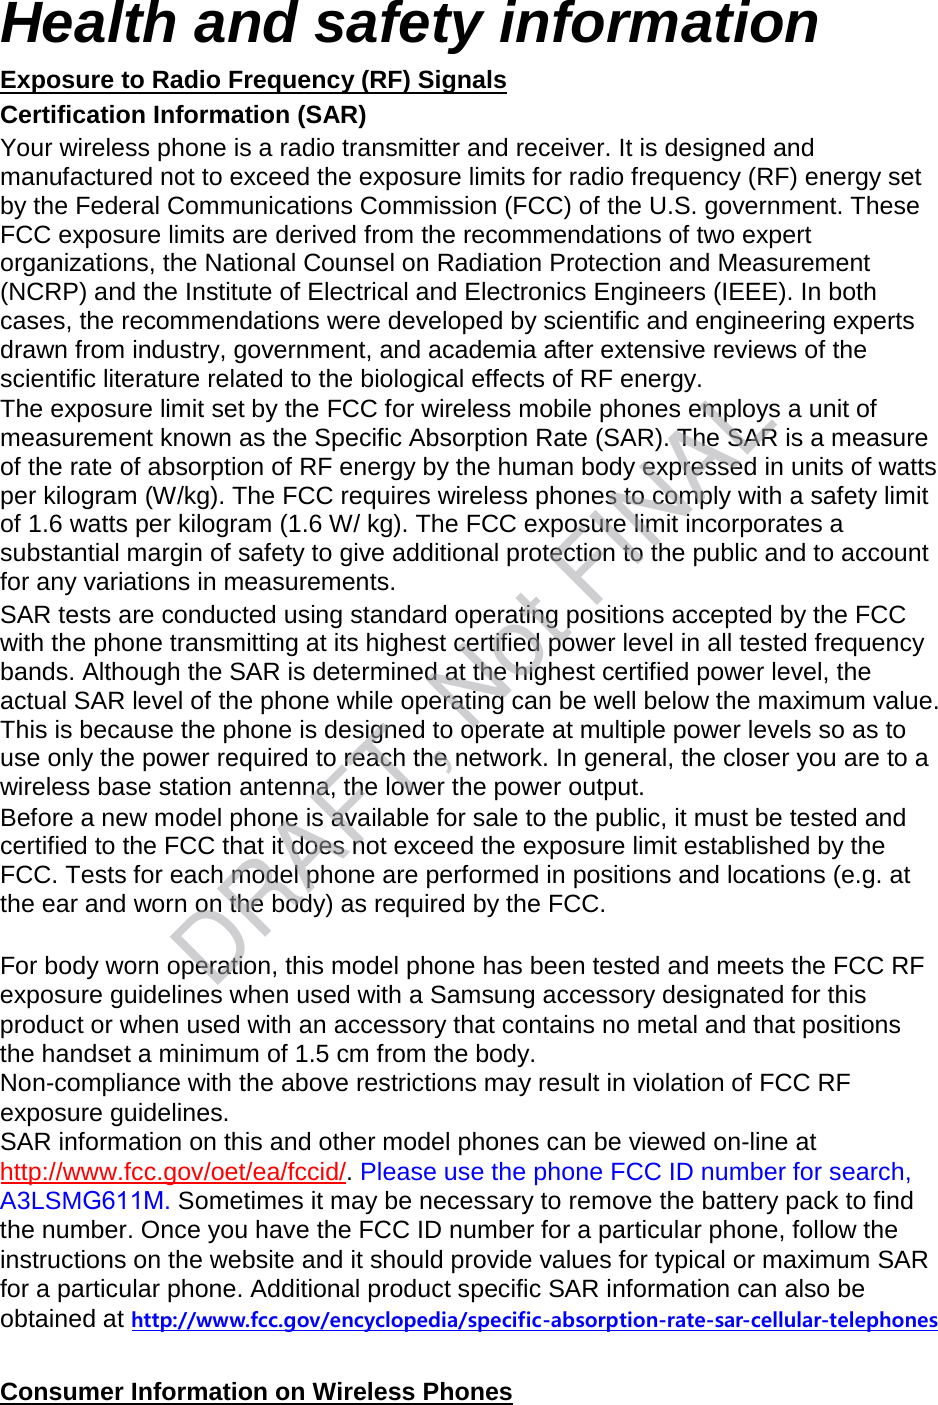 Health and safety information Exposure to Radio Frequency (RF) Signals Certification Information (SAR) Your wireless phone is a radio transmitter and receiver. It is designed and manufactured not to exceed the exposure limits for radio frequency (RF) energy set by the Federal Communications Commission (FCC) of the U.S. government. These FCC exposure limits are derived from the recommendations of two expert organizations, the National Counsel on Radiation Protection and Measurement (NCRP) and the Institute of Electrical and Electronics Engineers (IEEE). In both cases, the recommendations were developed by scientific and engineering experts drawn from industry, government, and academia after extensive reviews of the scientific literature related to the biological effects of RF energy. The exposure limit set by the FCC for wireless mobile phones employs a unit of measurement known as the Specific Absorption Rate (SAR). The SAR is a measure of the rate of absorption of RF energy by the human body expressed in units of watts per kilogram (W/kg). The FCC requires wireless phones to comply with a safety limit of 1.6 watts per kilogram (1.6 W/ kg). The FCC exposure limit incorporates a substantial margin of safety to give additional protection to the public and to account for any variations in measurements. SAR tests are conducted using standard operating positions accepted by the FCC with the phone transmitting at its highest certified power level in all tested frequency bands. Although the SAR is determined at the highest certified power level, the actual SAR level of the phone while operating can be well below the maximum value. This is because the phone is designed to operate at multiple power levels so as to use only the power required to reach the network. In general, the closer you are to a wireless base station antenna, the lower the power output. Before a new model phone is available for sale to the public, it must be tested and certified to the FCC that it does not exceed the exposure limit established by the FCC. Tests for each model phone are performed in positions and locations (e.g. at the ear and worn on the body) as required by the FCC.     For body worn operation, this model phone has been tested and meets the FCC RF exposure guidelines when used with a Samsung accessory designated for this product or when used with an accessory that contains no metal and that positions the handset a minimum of 1.5 cm from the body.  Non-compliance with the above restrictions may result in violation of FCC RF exposure guidelines. SAR information on this and other model phones can be viewed on-line at http://www.fcc.gov/oet/ea/fccid/. Please use the phone FCC ID number for search, A3LSMG611M. Sometimes it may be necessary to remove the battery pack to find the number. Once you have the FCC ID number for a particular phone, follow the instructions on the website and it should provide values for typical or maximum SAR for a particular phone. Additional product specific SAR information can also be obtained at http://www.fcc.gov/encyclopedia/specific-absorption-rate-sar-cellular-telephonesConsumer Information on Wireless Phones DRAFT, Not FINAL